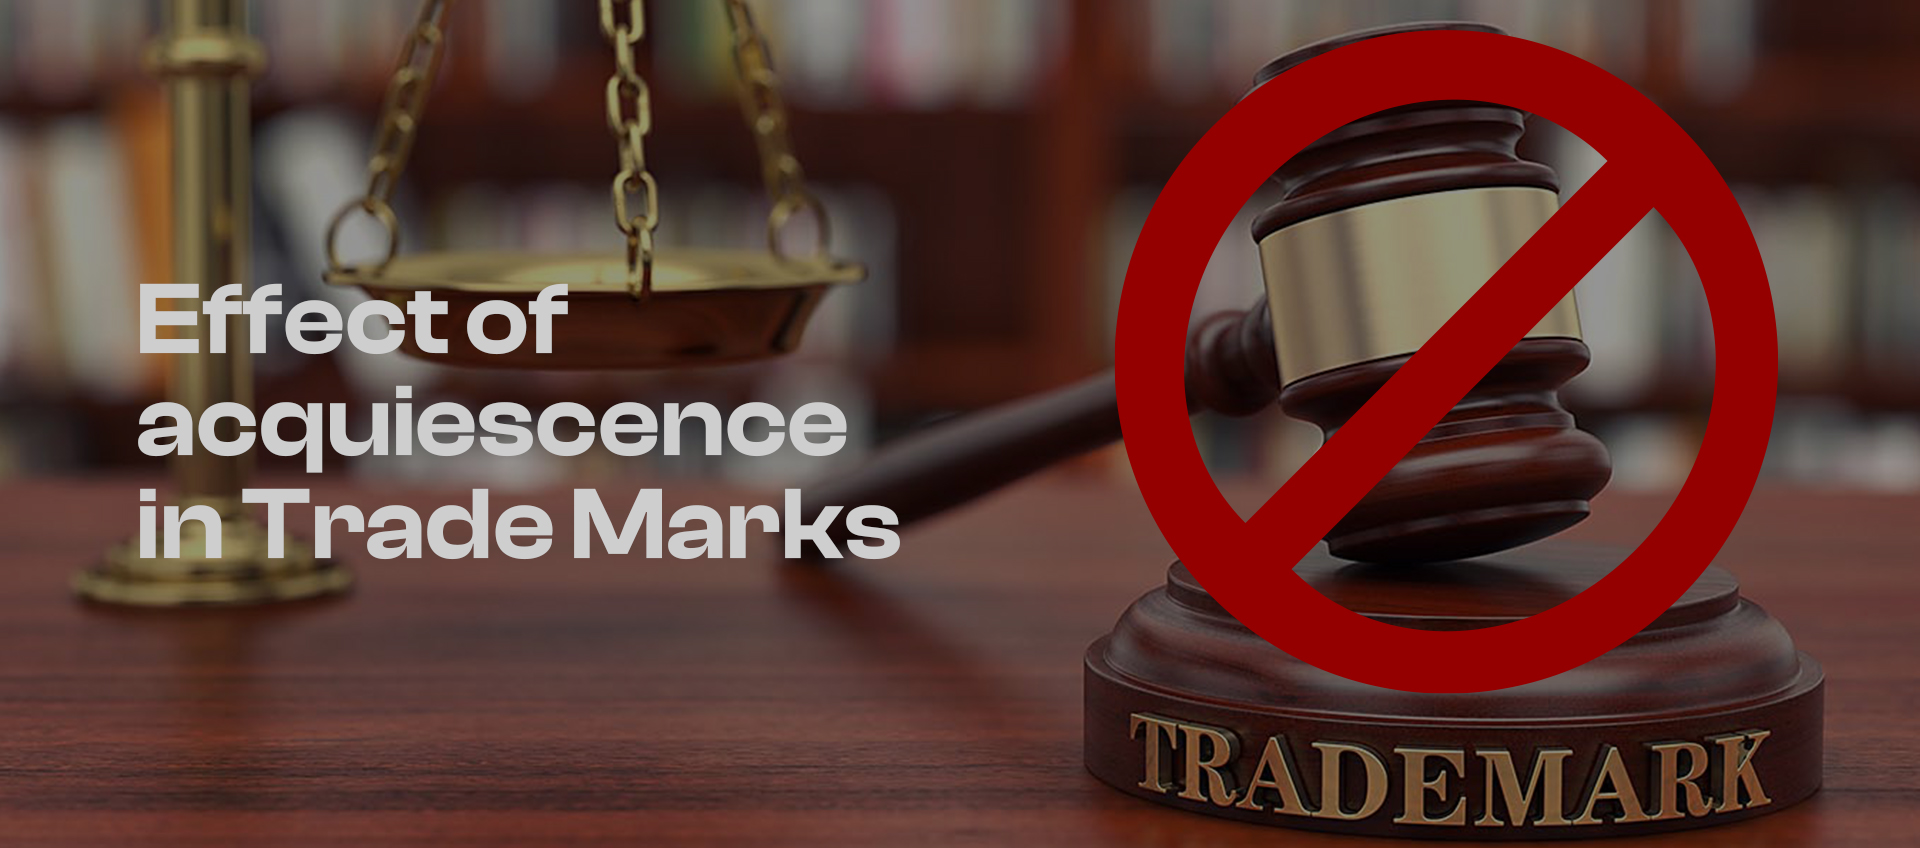 Effect of acquiescence in Trade Marks